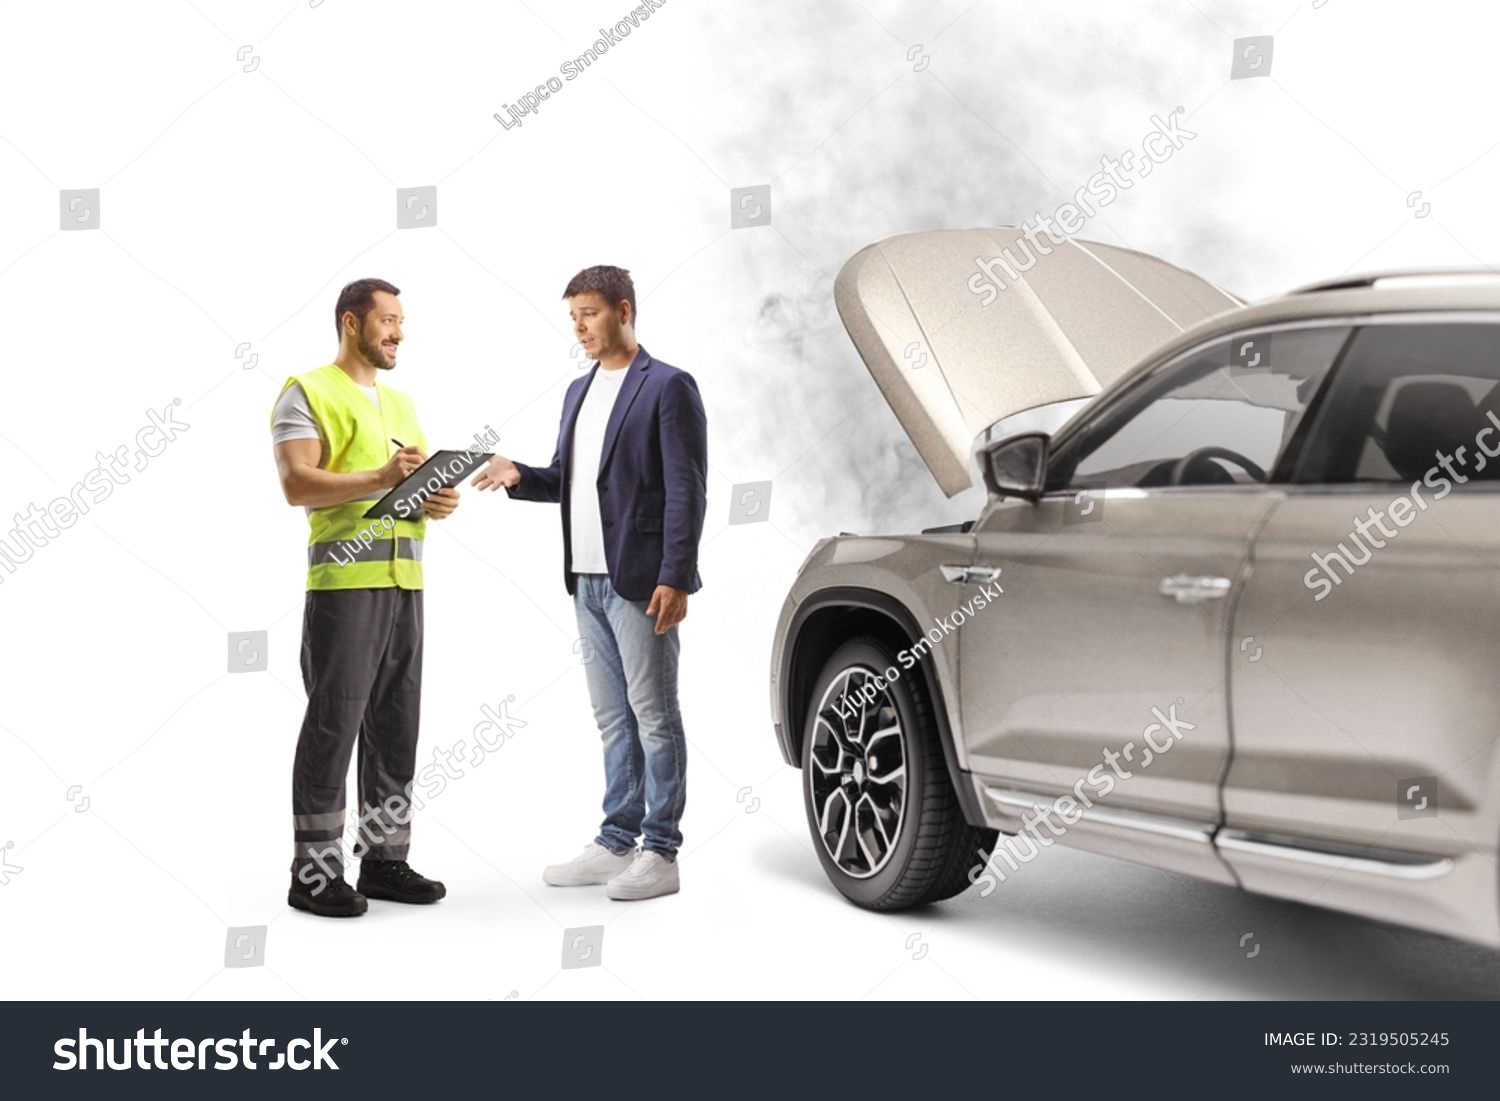 Road assistance worker and a man discussing a car problem  isolated on white background #2319505245